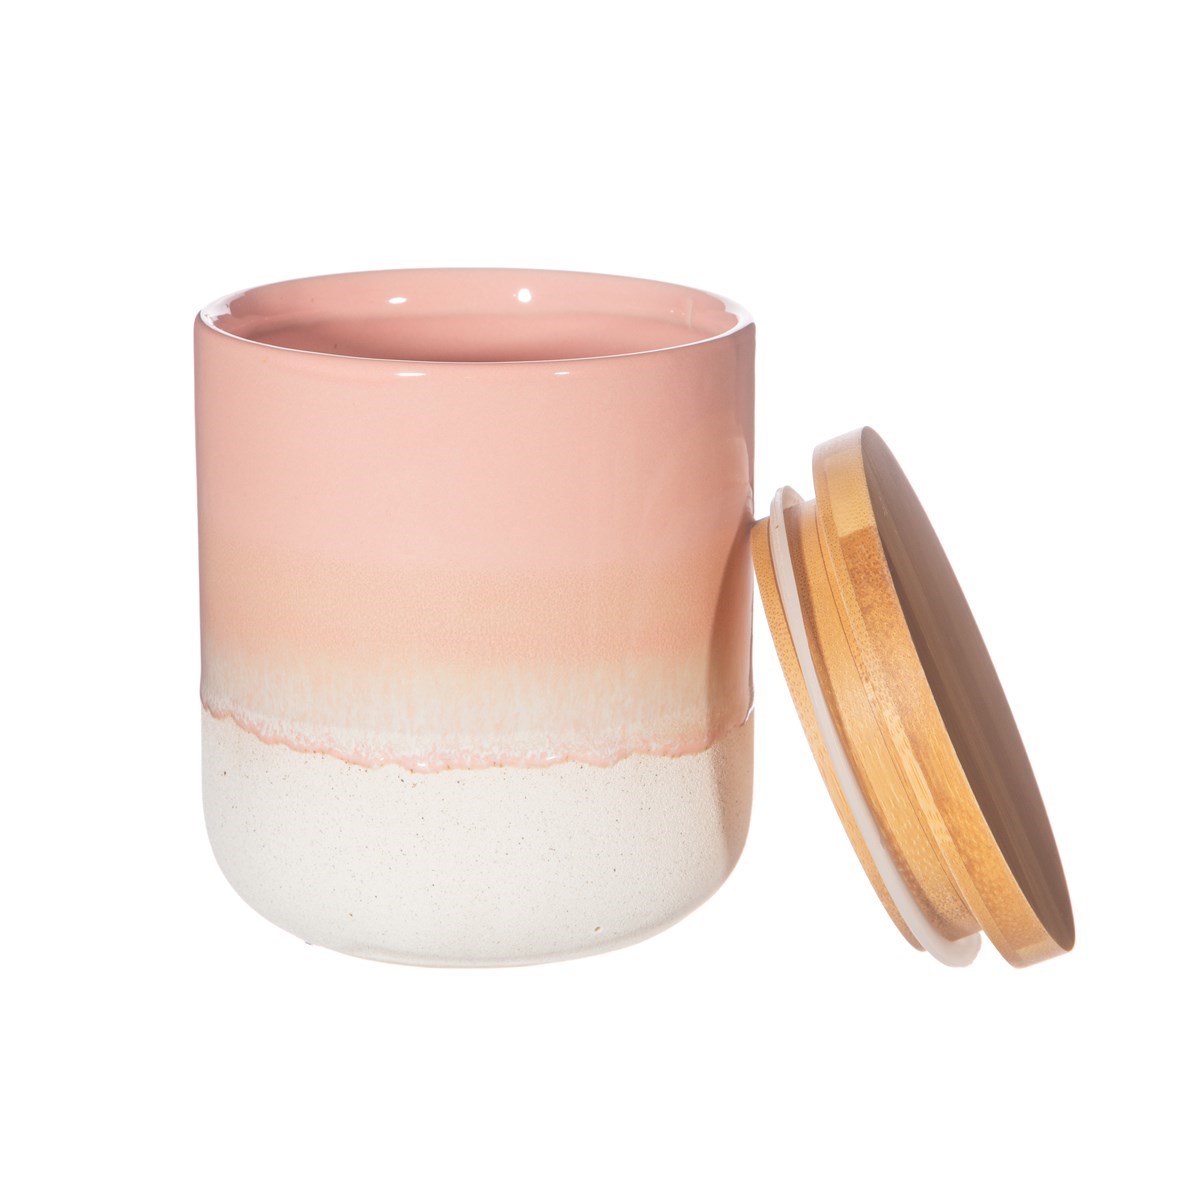 Sass & Belle Mojave Ombre Glaze Storage Canister Pink